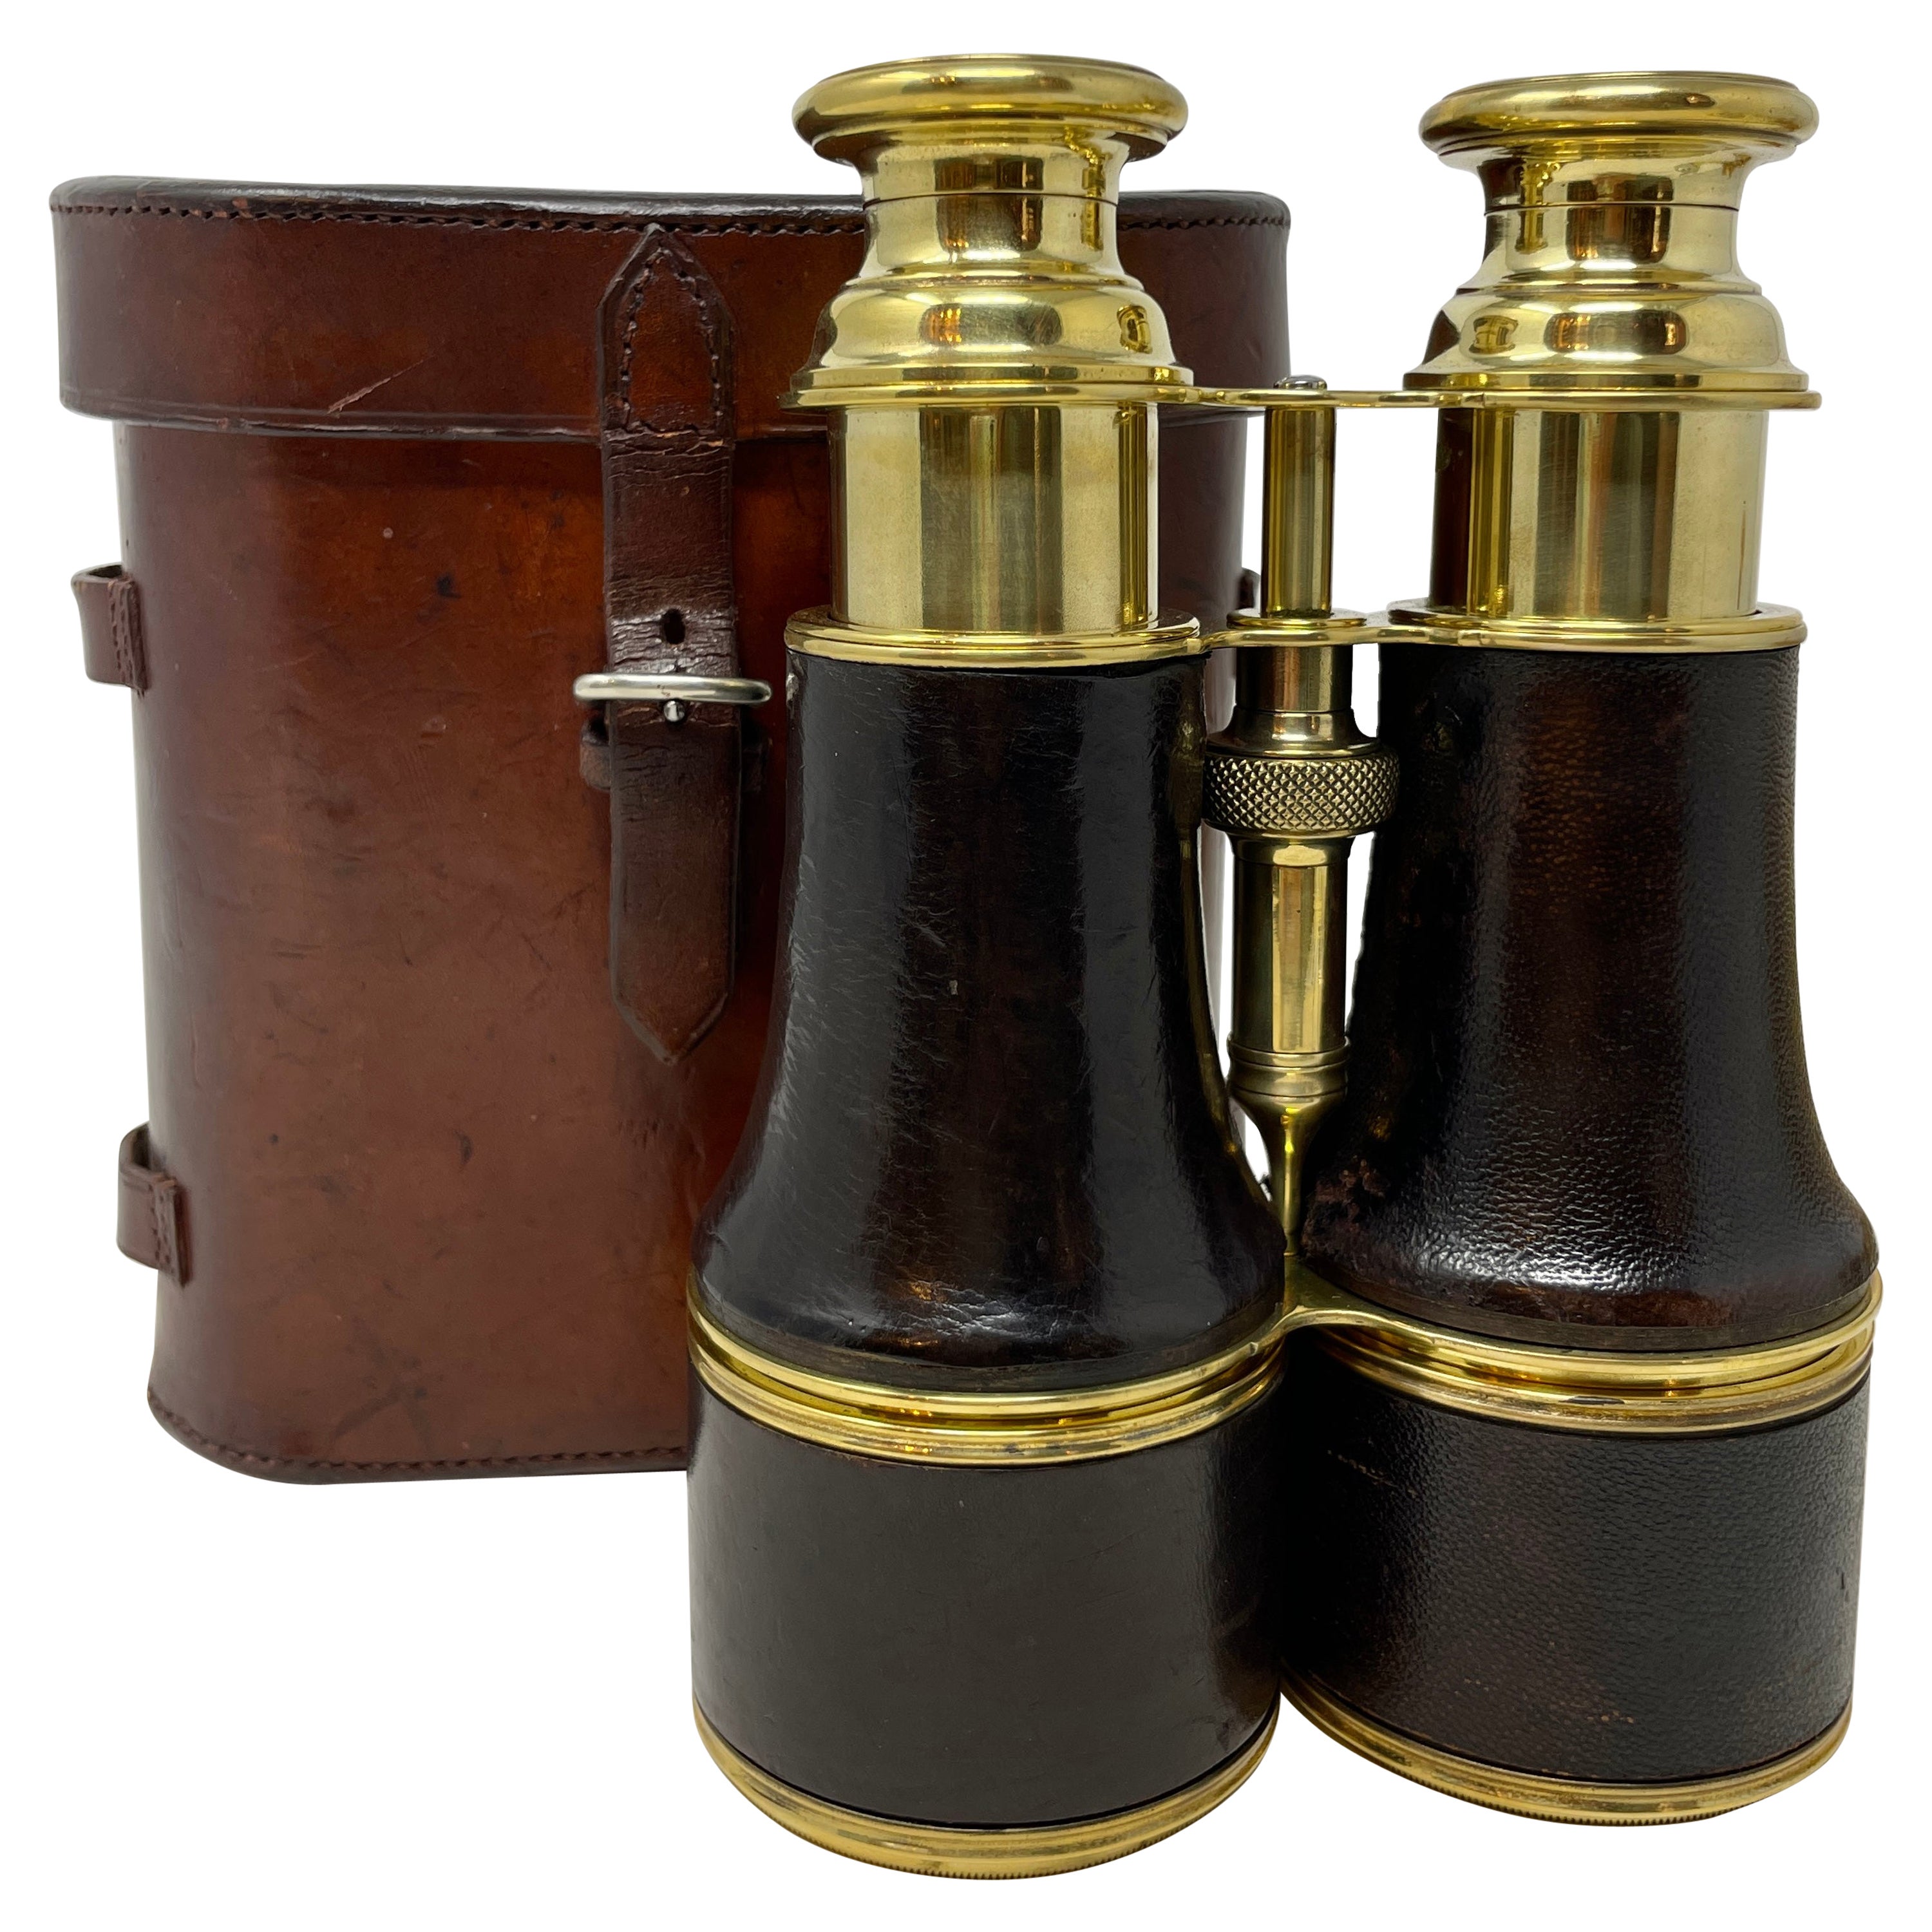 Antique English Binoculars with Leather Grips and Original Case, Circa 1910